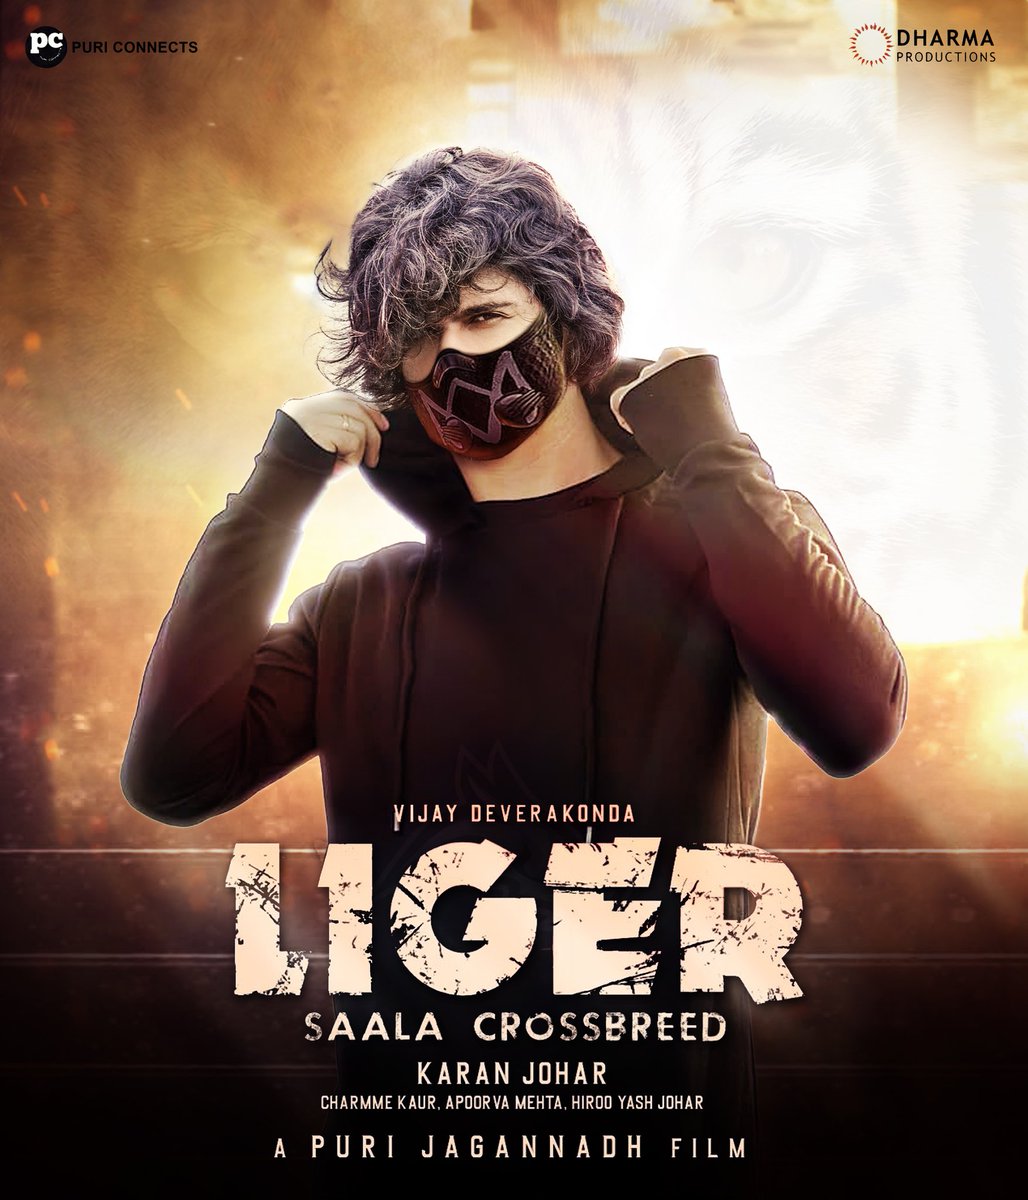 Teja Dayan is the #LIGER Unofficial Poster Design #SaalaCrossbreed